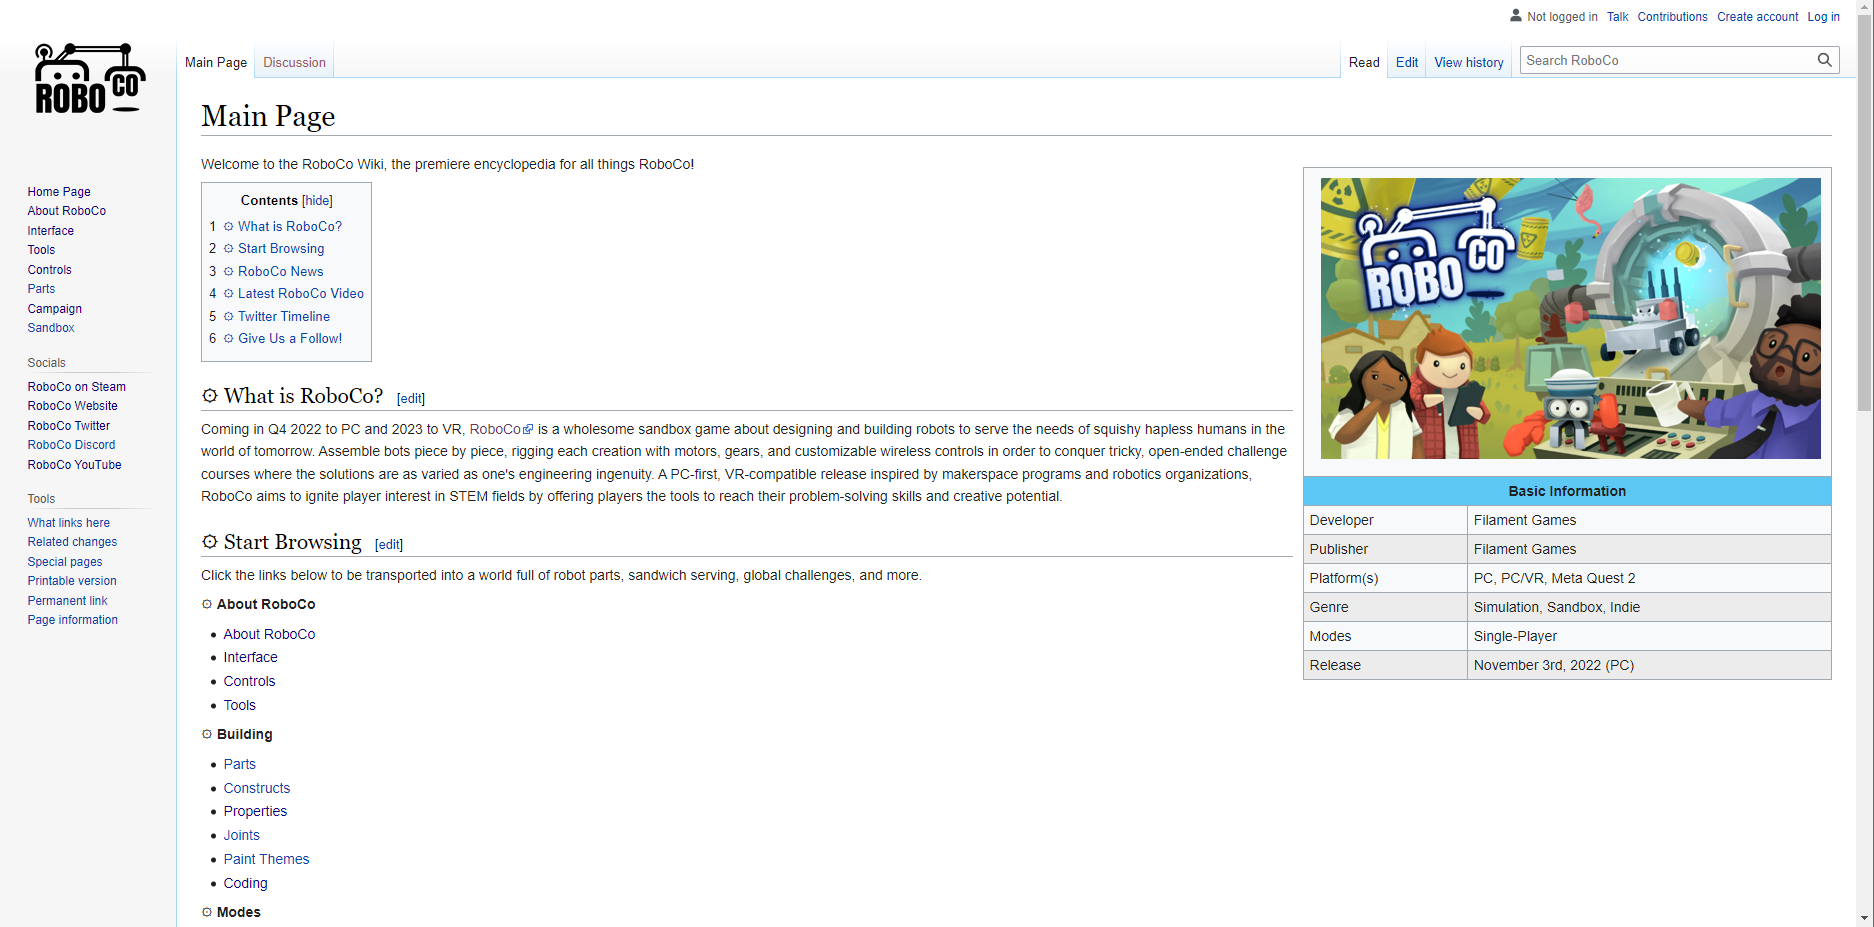 We Have a New Wiki and API Documentation!